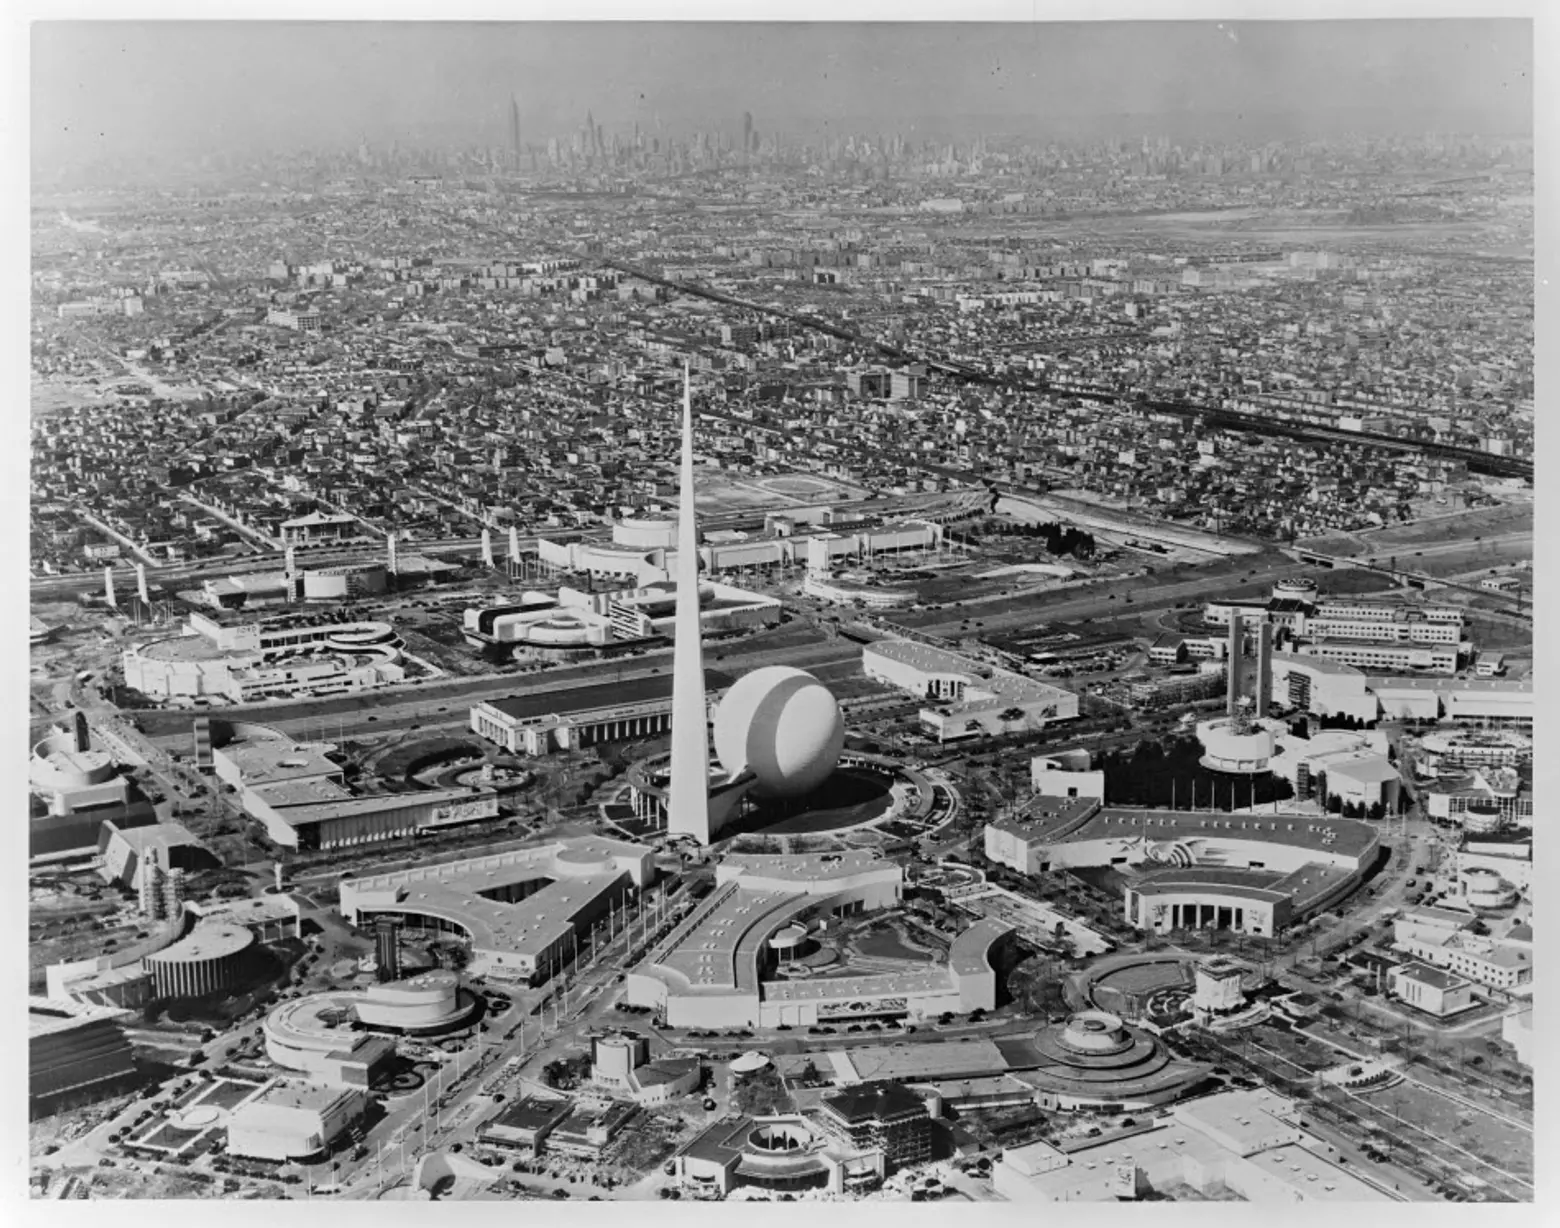 Historic photos take you back to the 1939 New York World’s Fair in Flushing Meadows